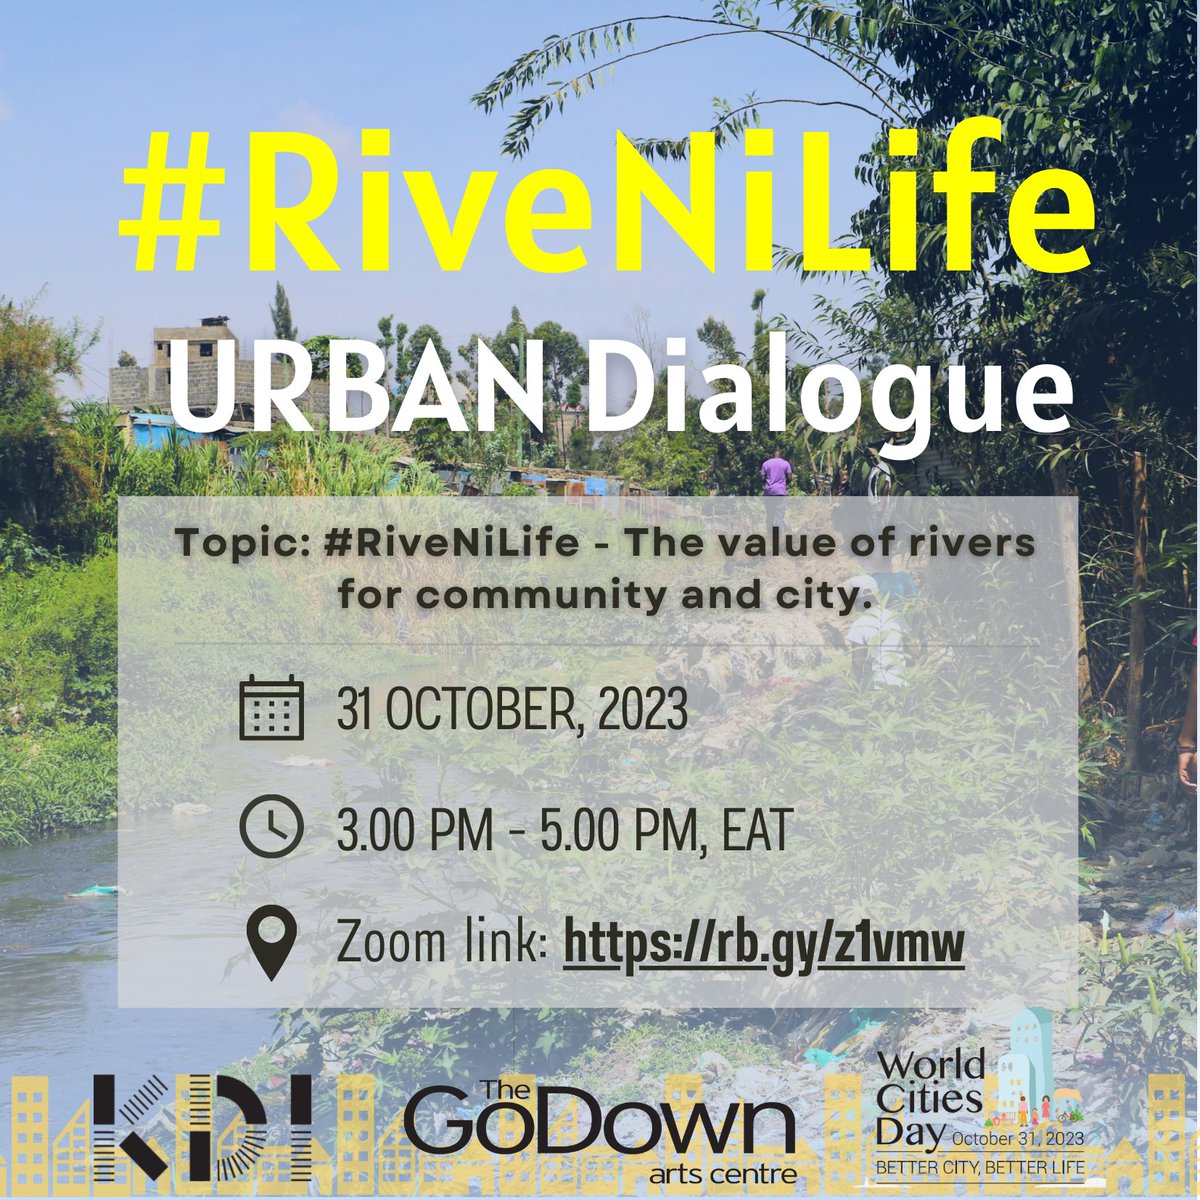 Just one day remaining for the #RiveNiLife Dialogue! Are you passionate about the environment, rivers, and building a more sustainable future for our cities? If so, join us for our inspiring dialogue: '#RiveNiLife - The value of rivers for community and city.'